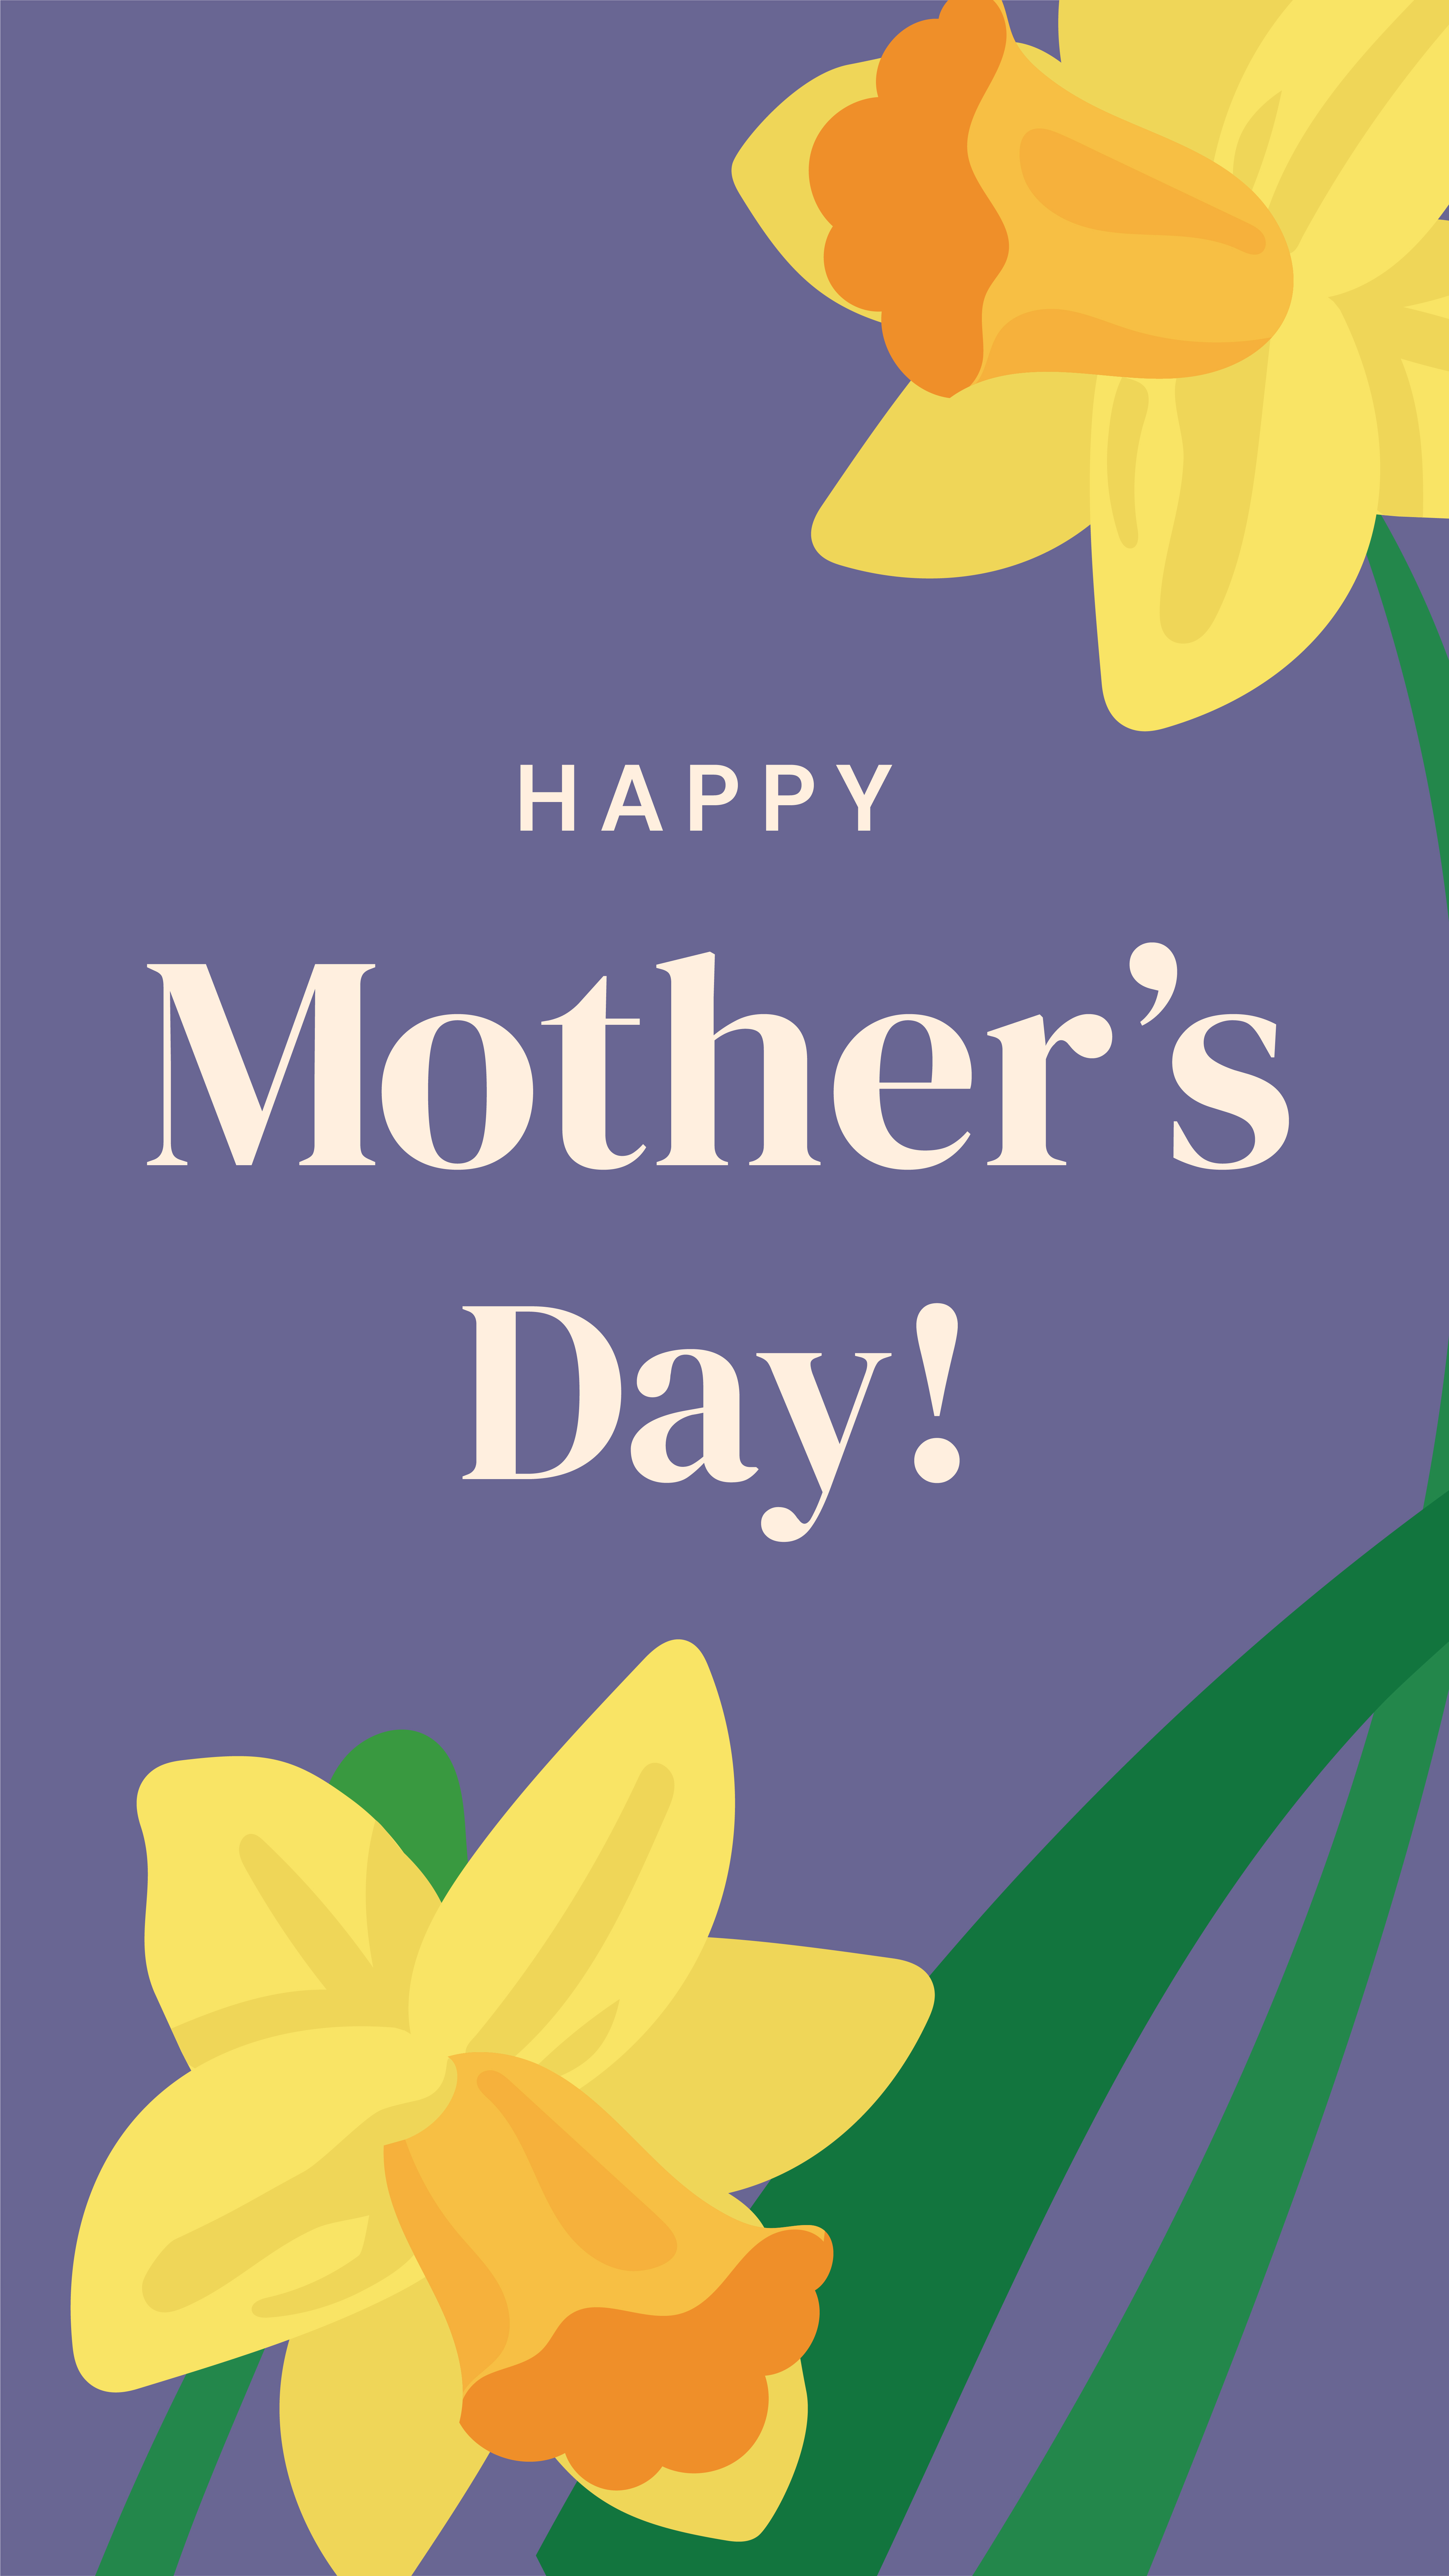 A Helpful Guide to a Happy Mother's Day : A Mother's Day Message from Fiona  Cooke - Orphans Publishing